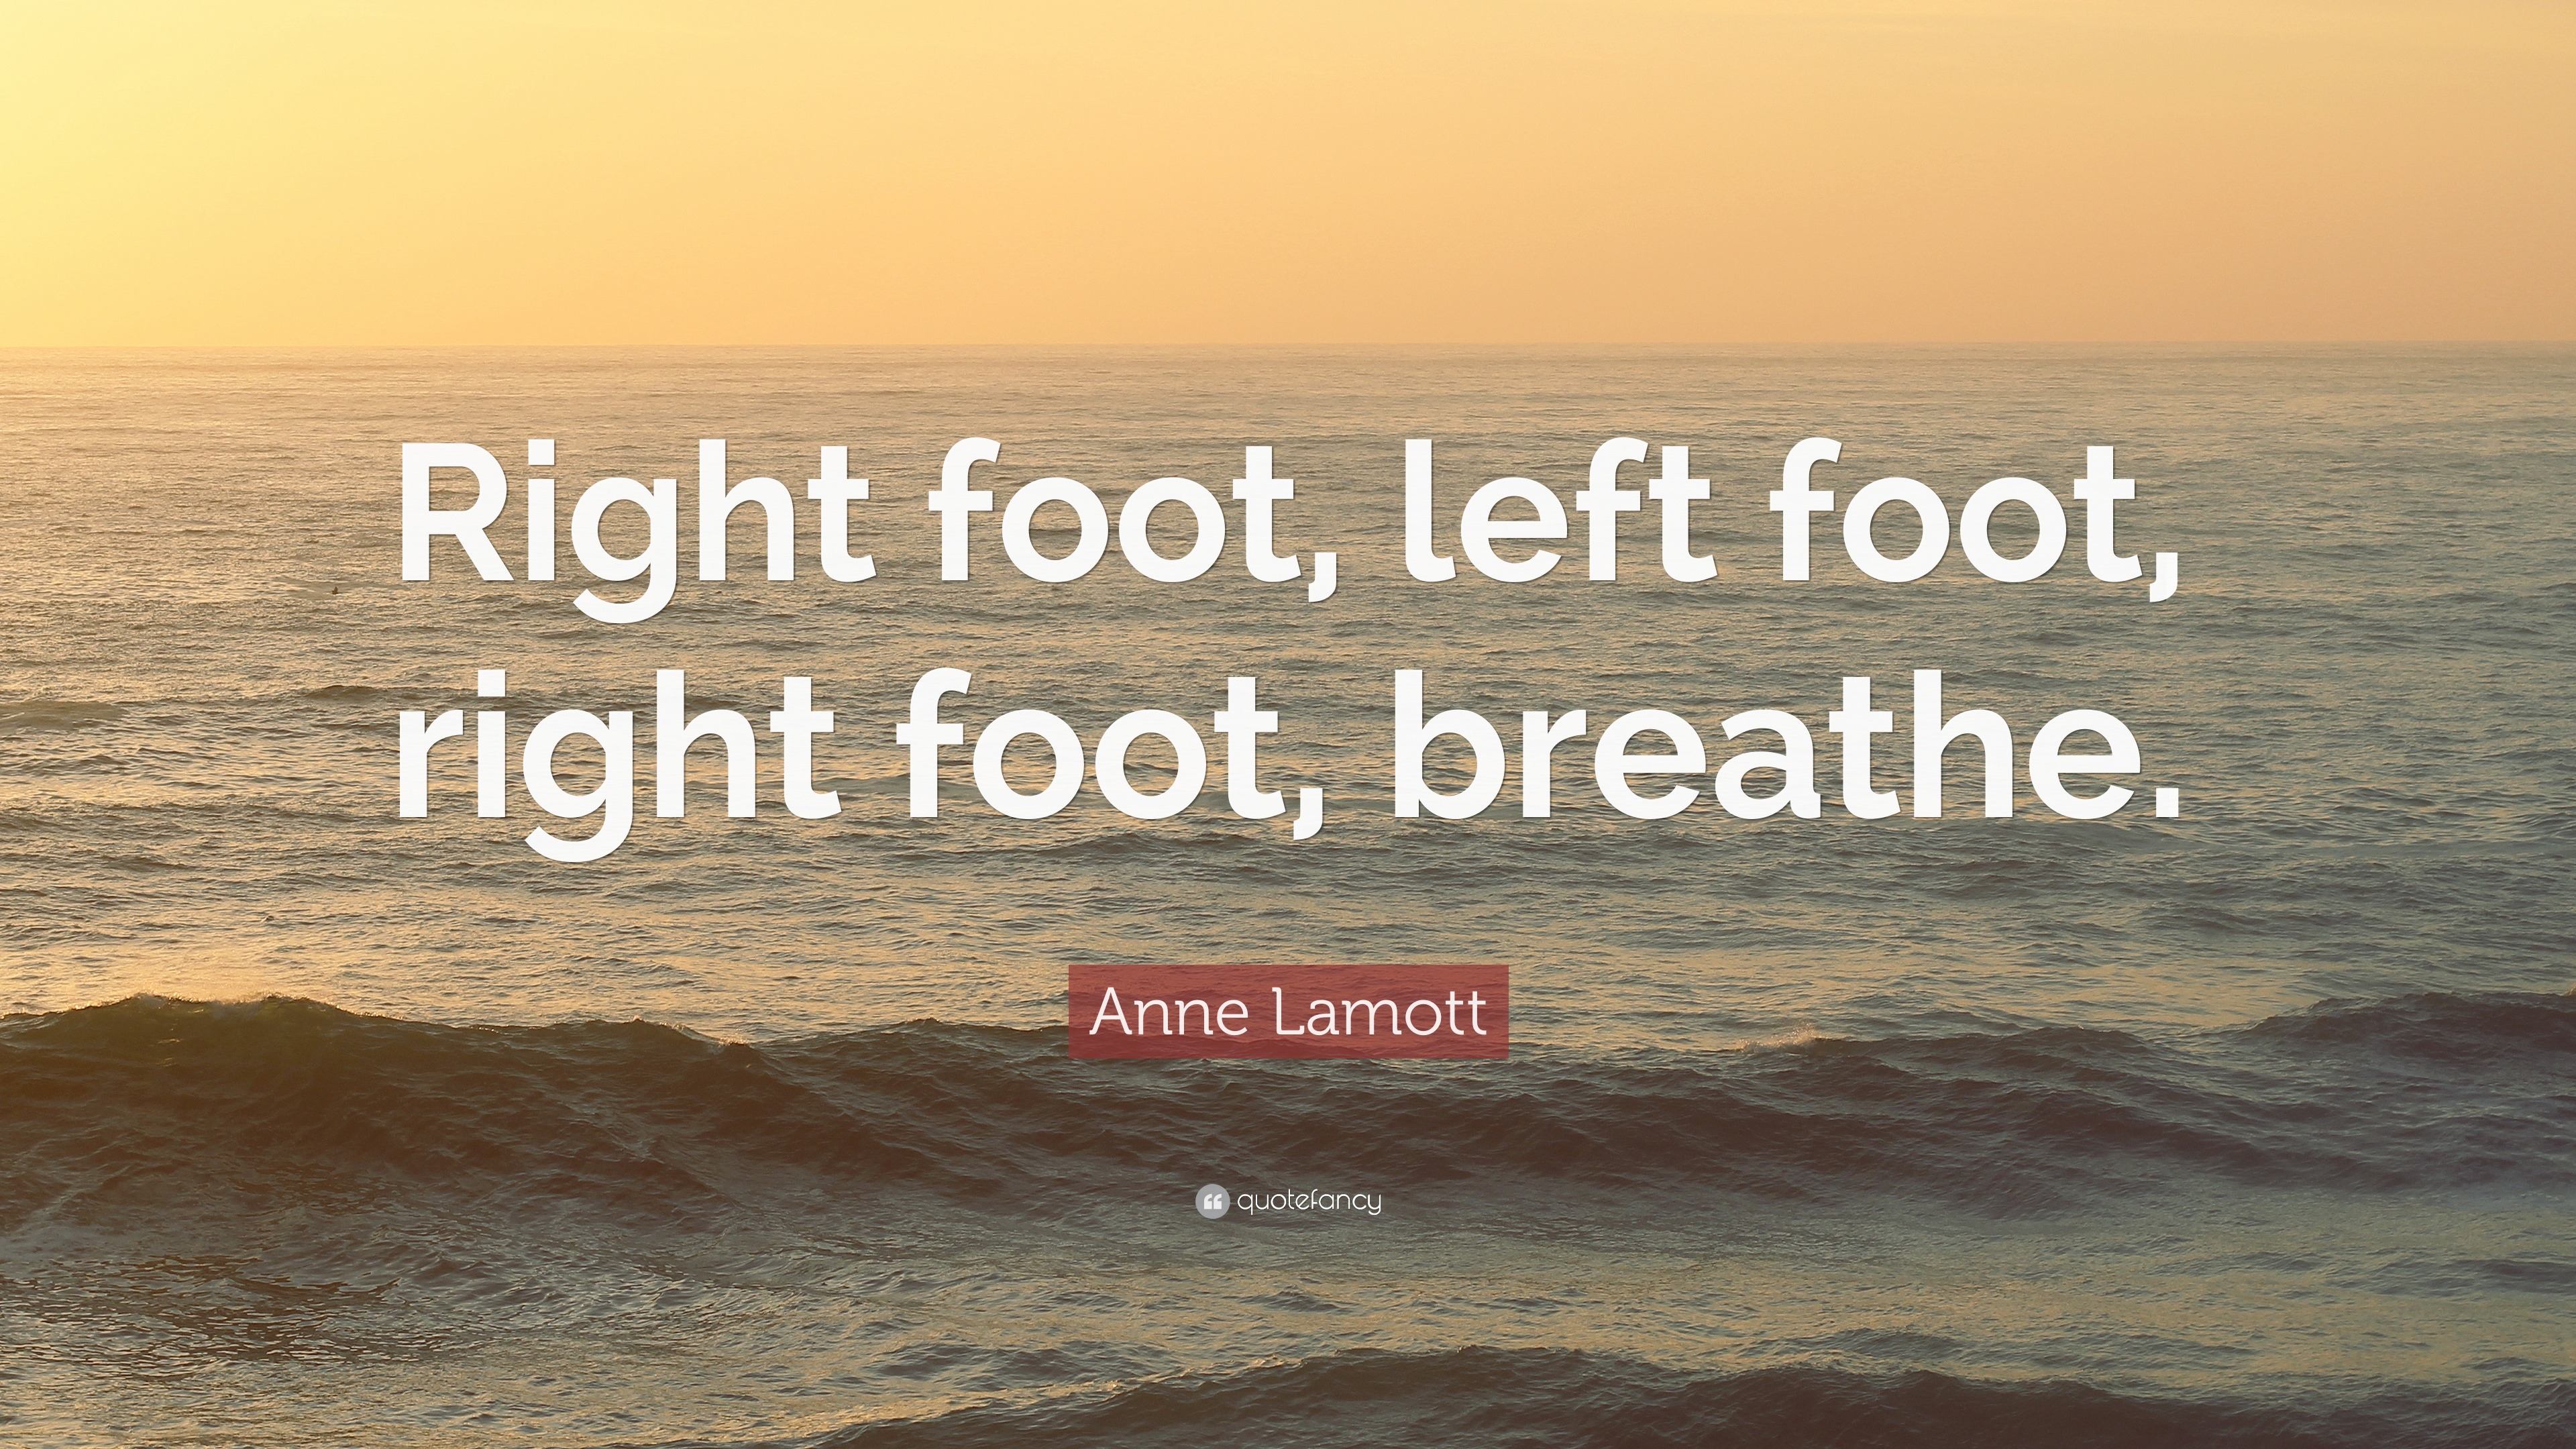 Anne Lamott Quote “right Foot Left Foot Right Foot Breathe”